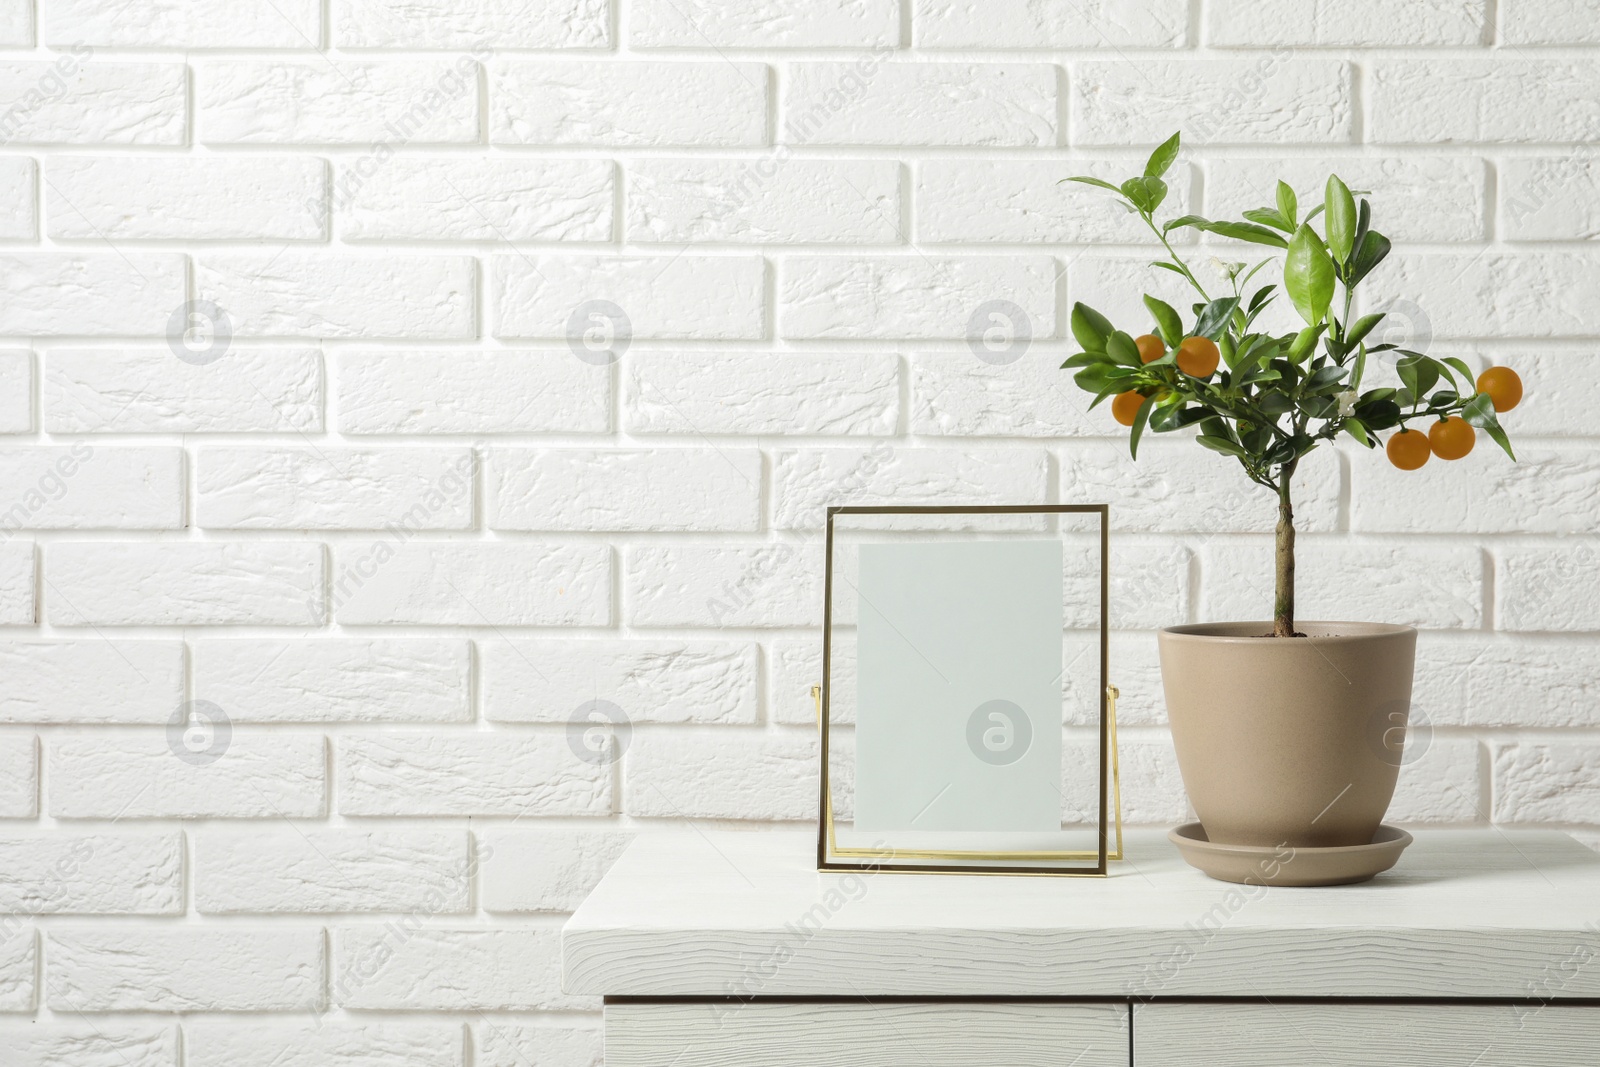 Photo of Potted citrus tree and empty frame on cabinet against brick wall. Space for text